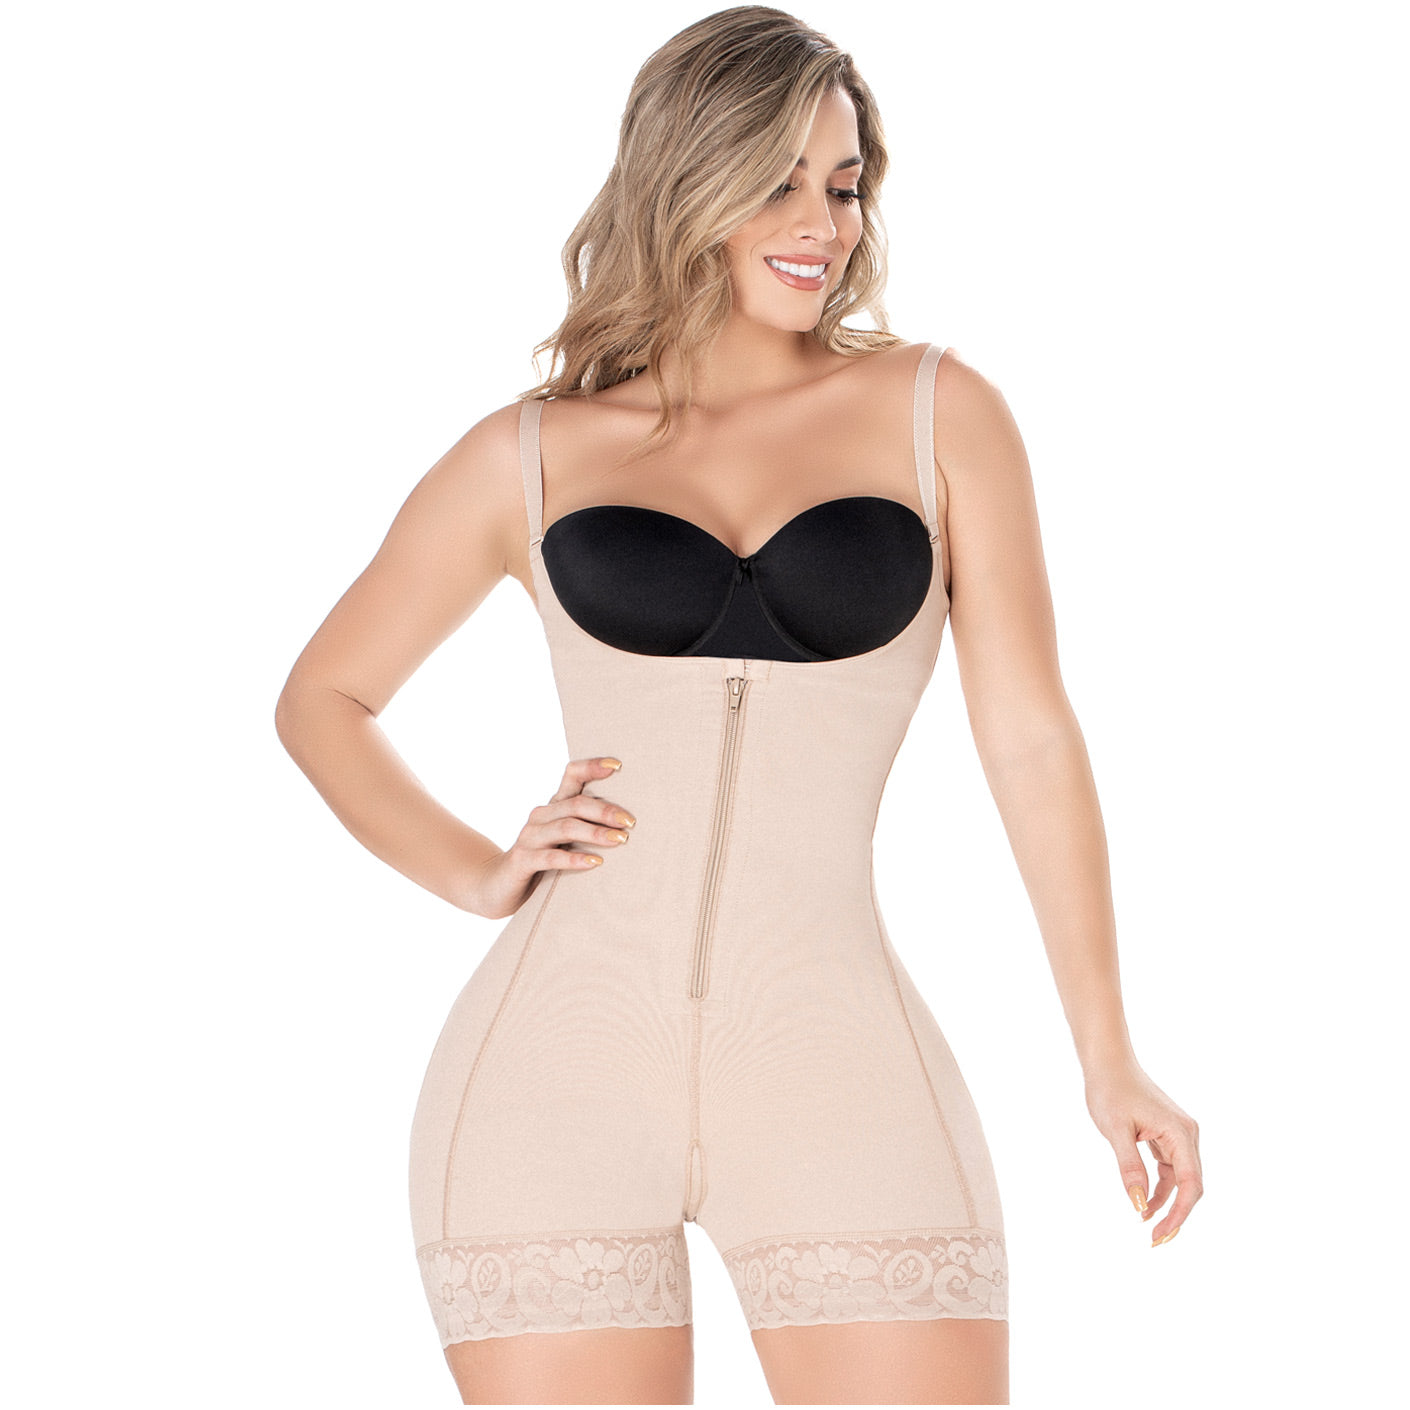 Tummy Tuck Post-Surgery and Daily Use Shapewear with Flat Zipper, Open Bust, & Medium Compression Diane & Geordi 2396-1-Shapes Secrets Fajas